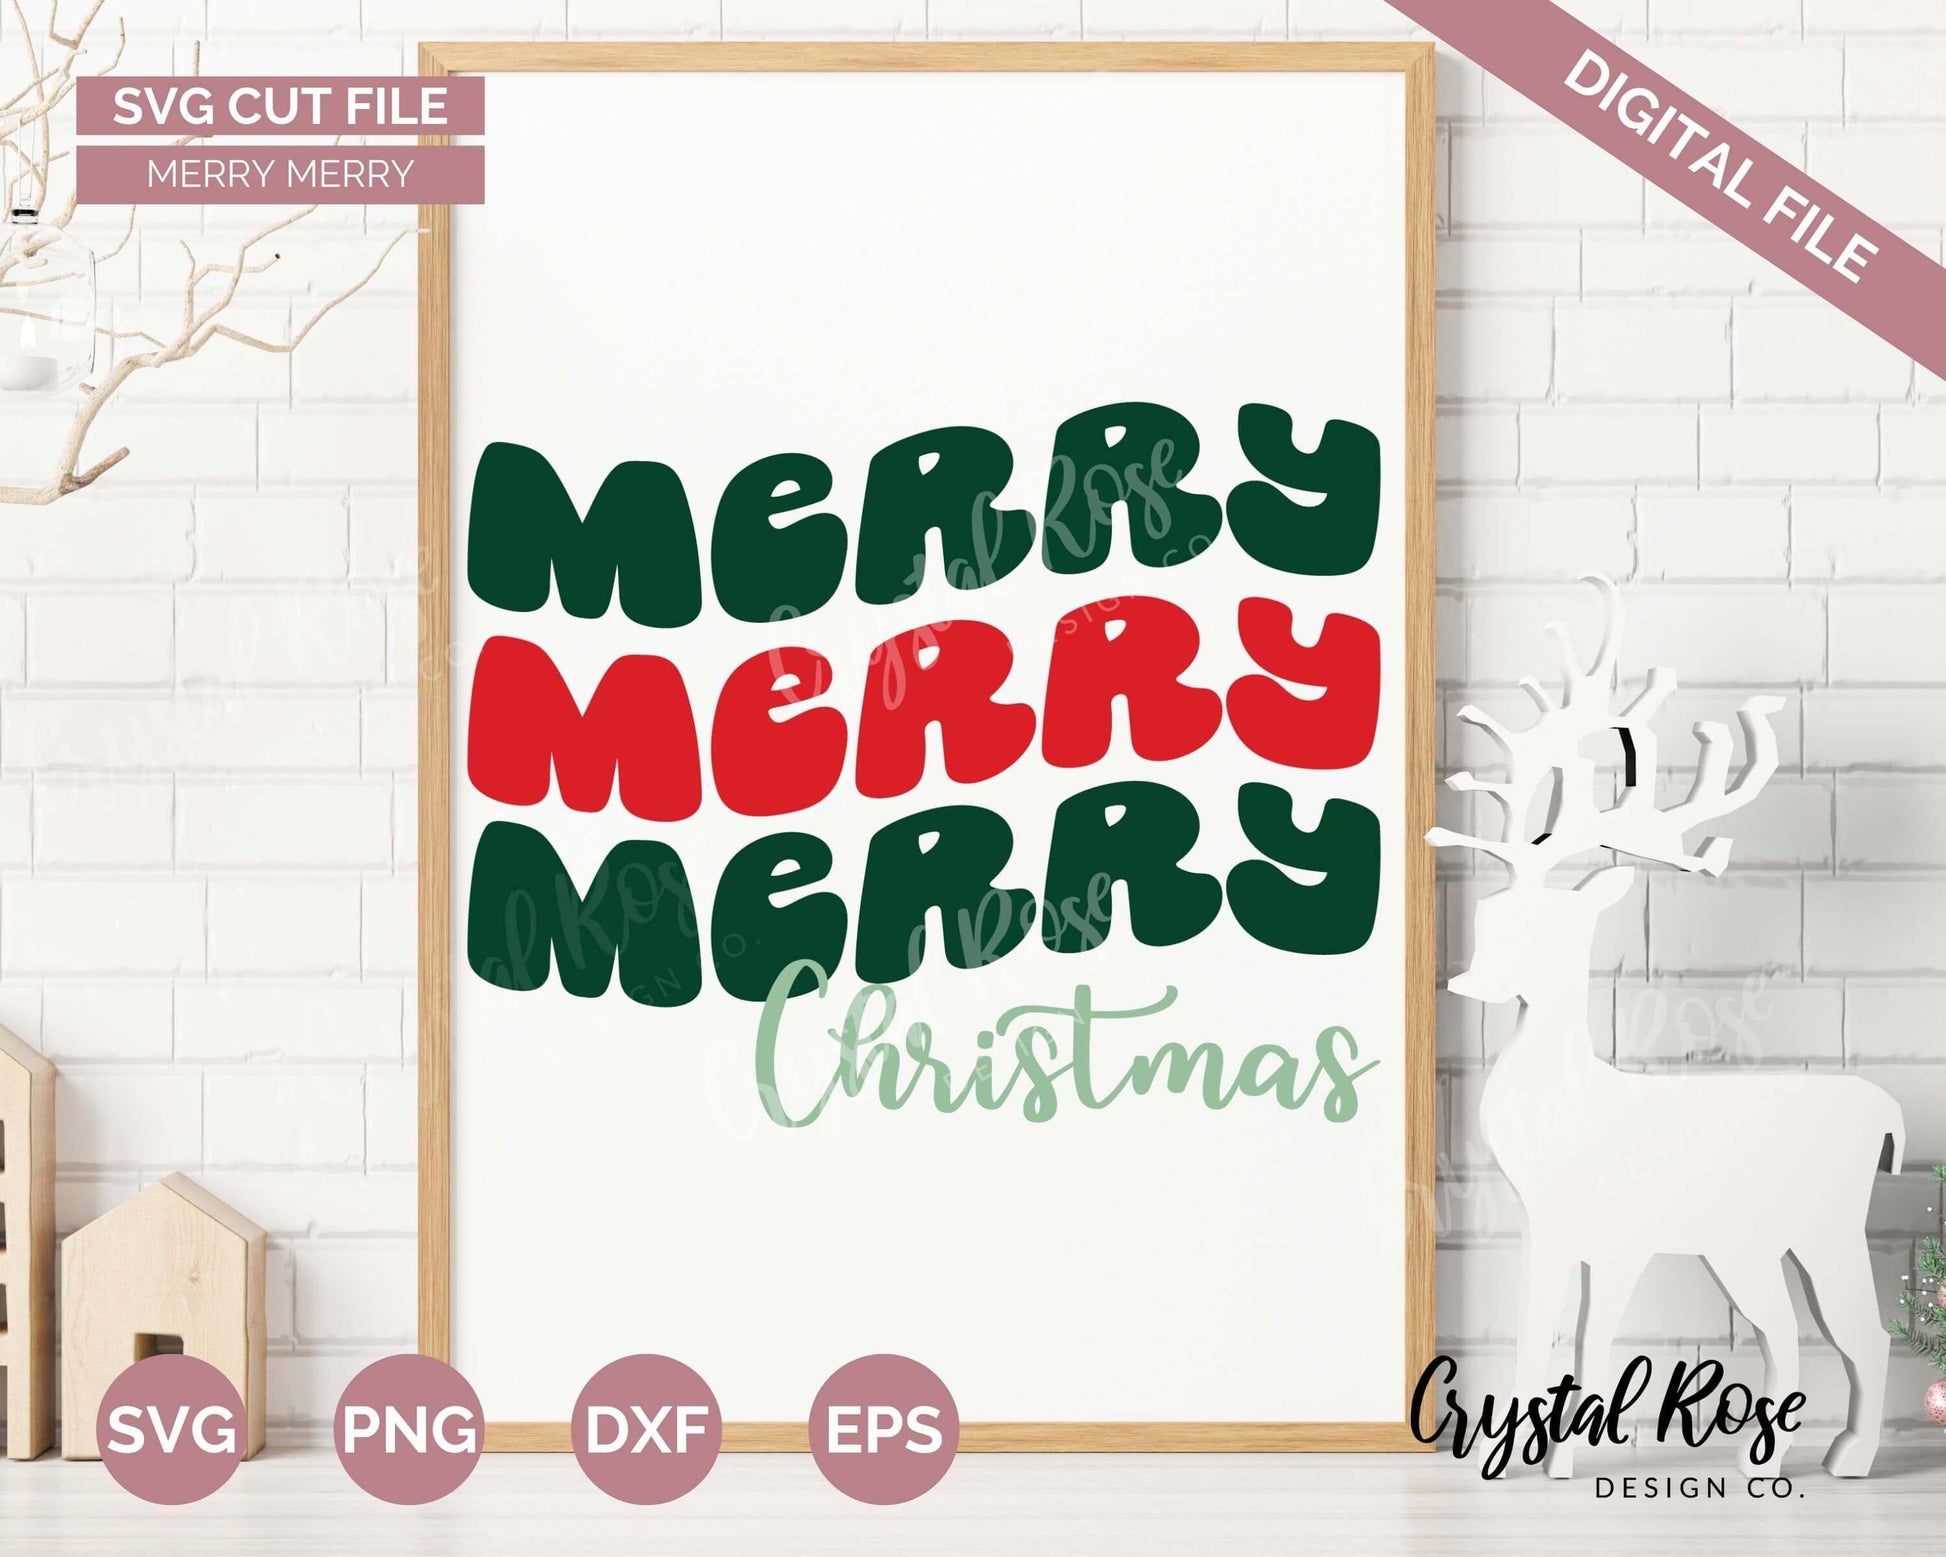 Retro Merry Christmas SVG, Christmas SVG, Digital Download, Cricut, Silhouette, Glowforge (includes svg/png/dxf/eps) - Crystal Rose Design Co.